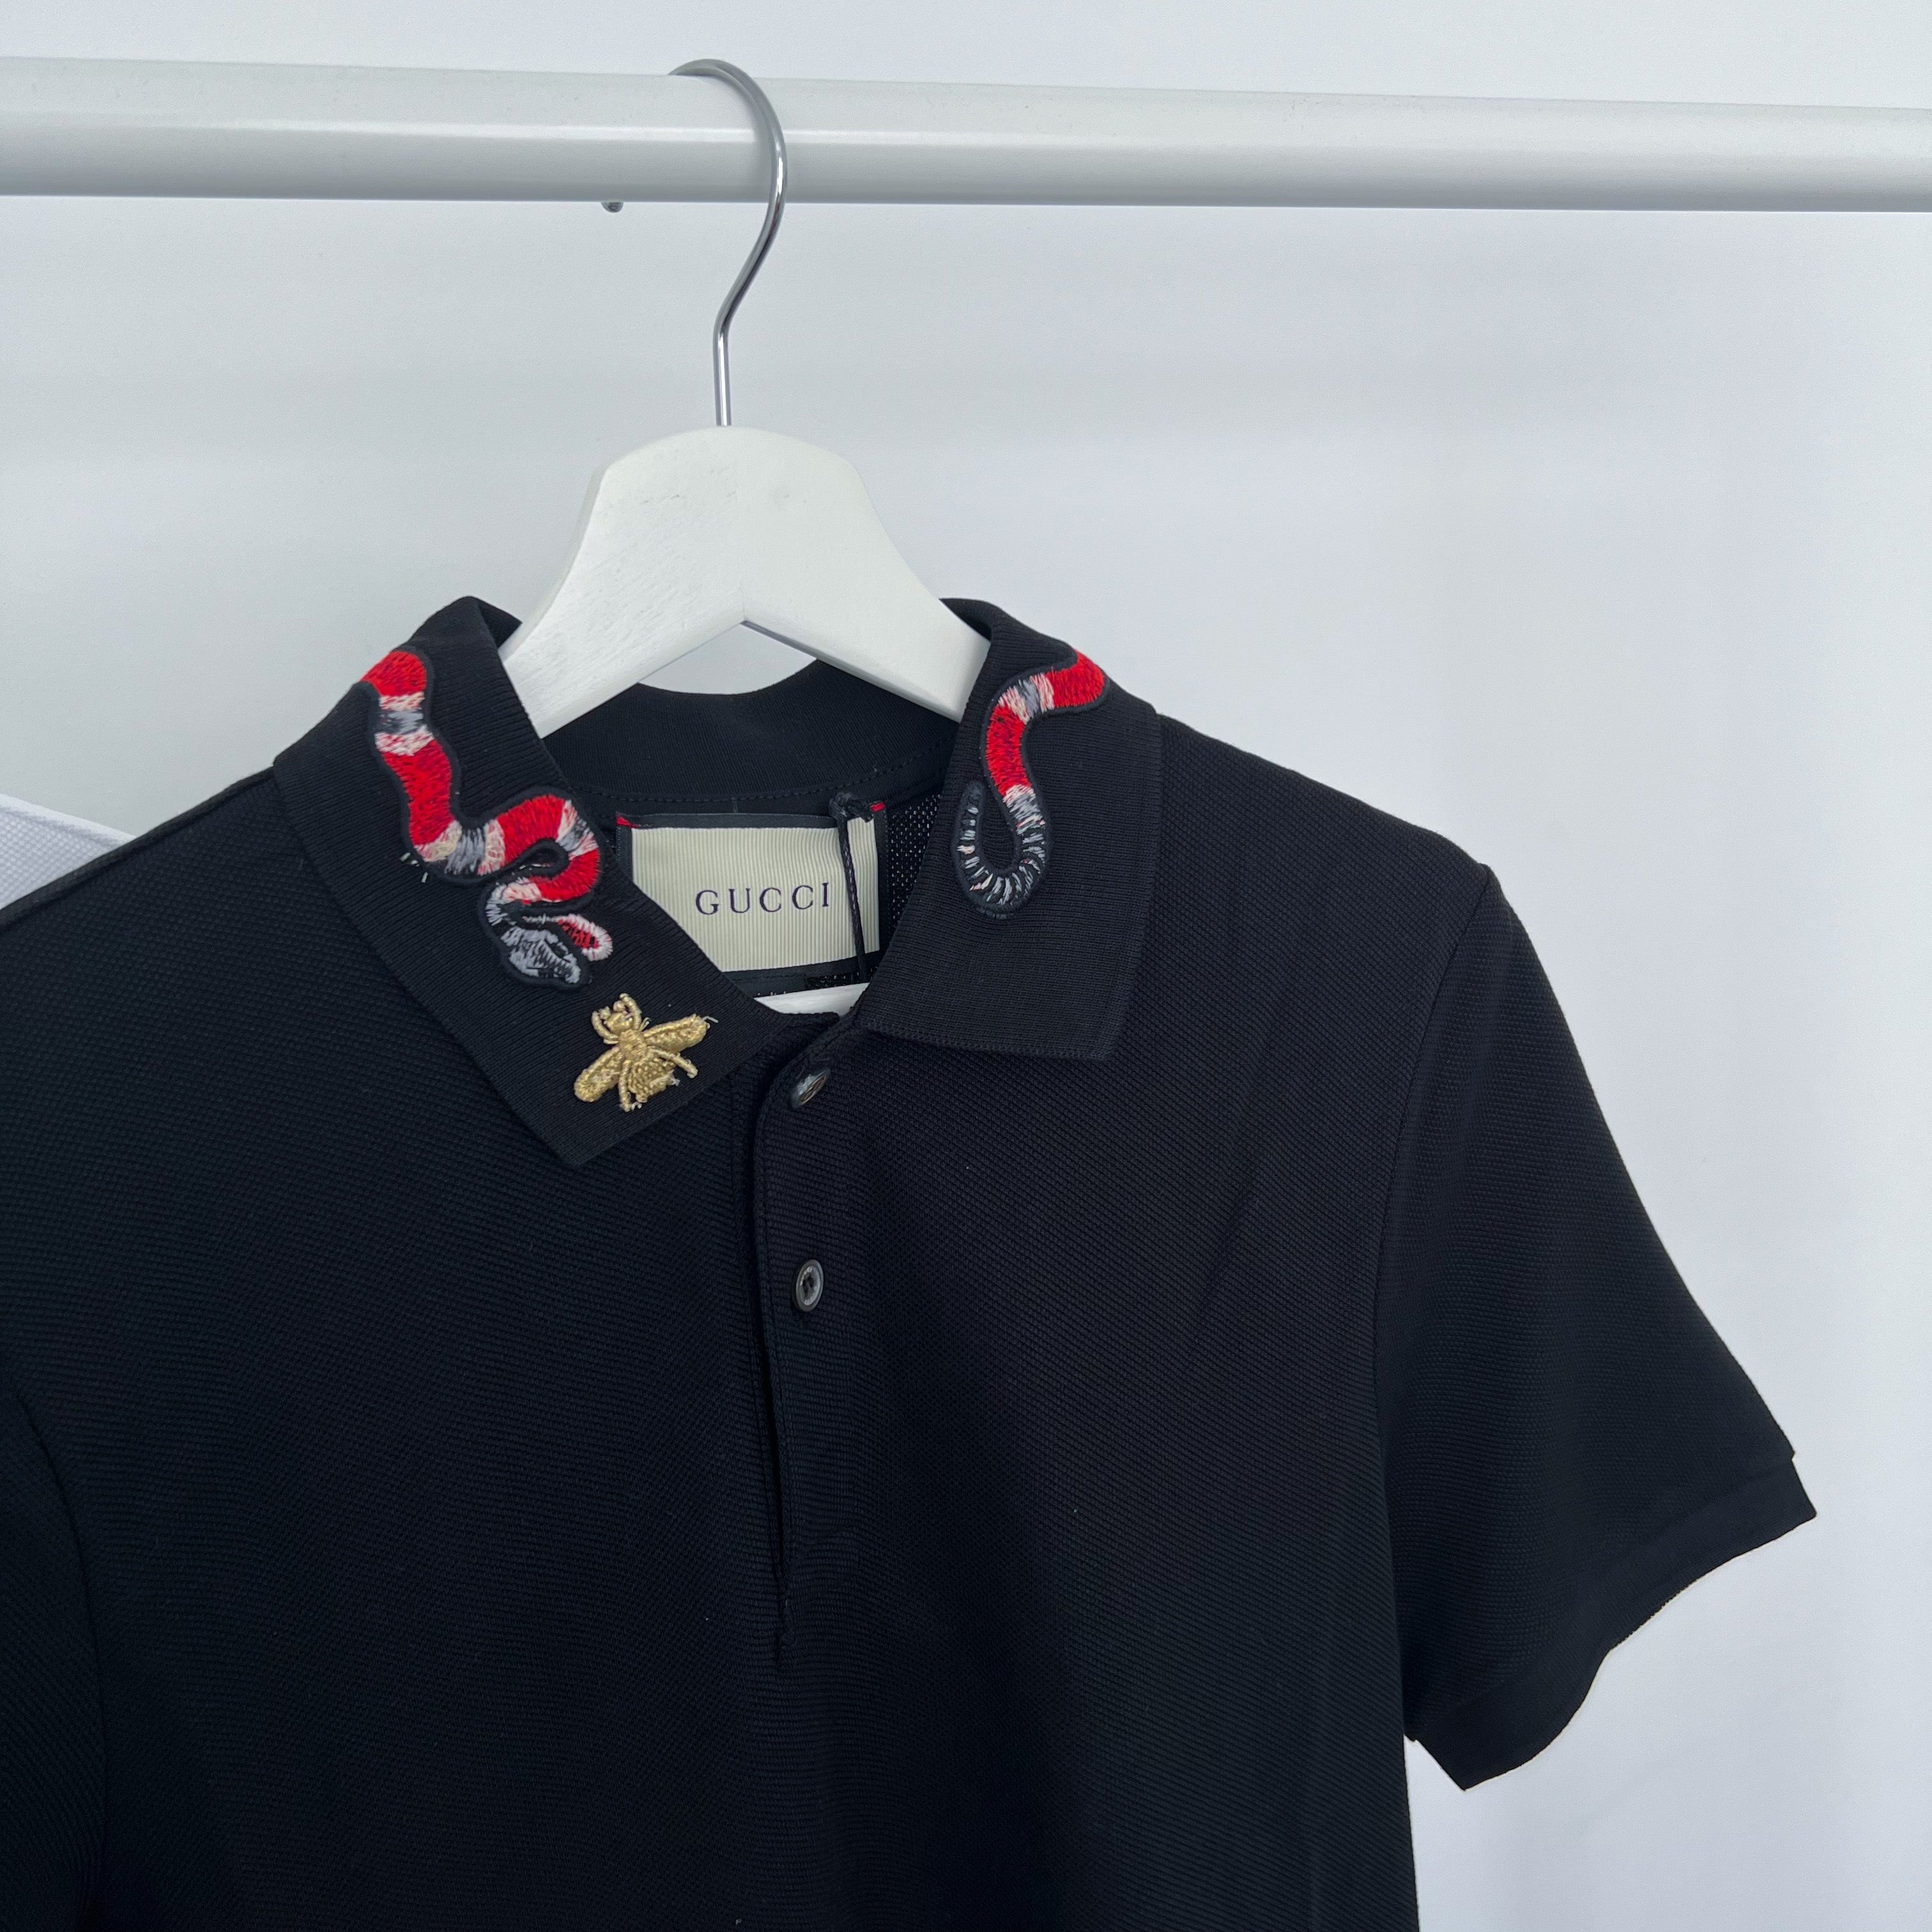 Gucci Embroidered Snake Polo - Black